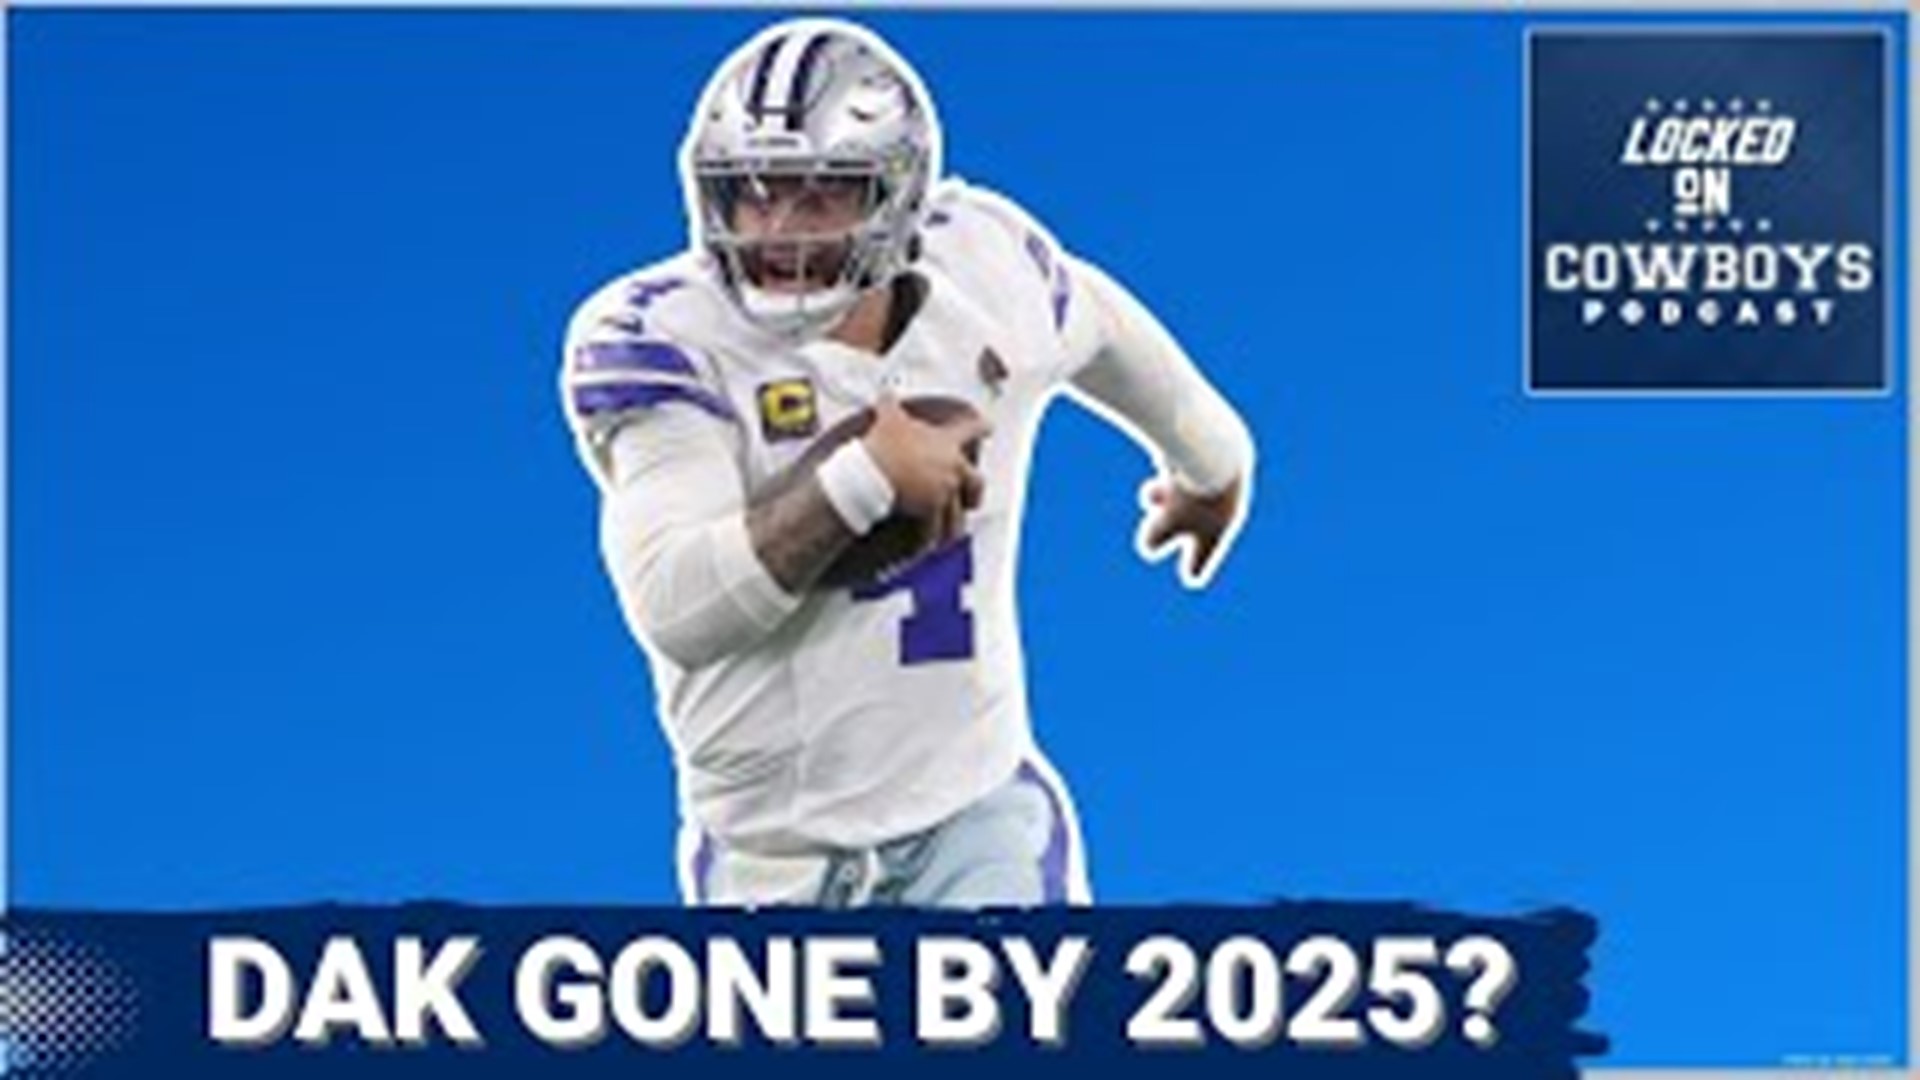 Dallas Cowboys QB Dak Prescott made some very interesting comments about his future with the team on Friday. Will he return in 2025 or will he leave in free agency?